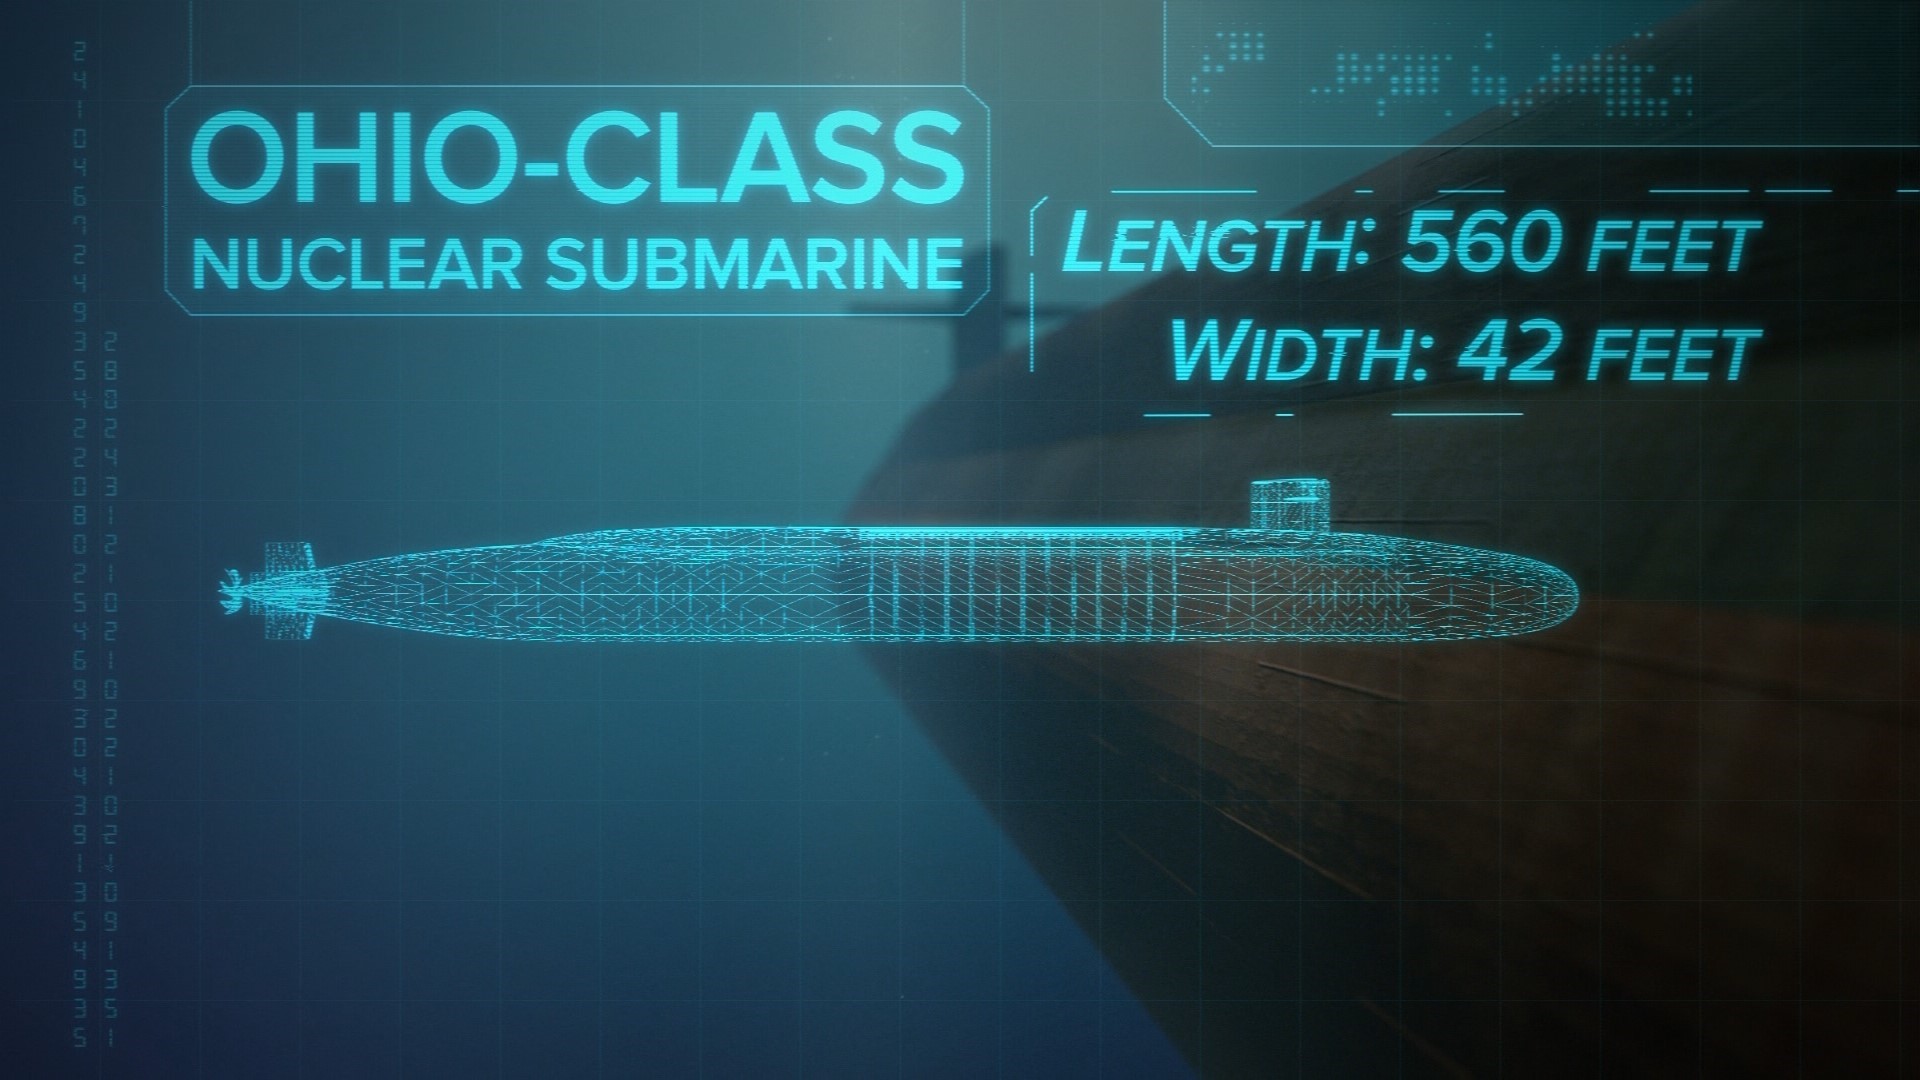 The Navy's Ohio-class nuclear submarines are behemoths. They are nicknamed "boomers" and there are 10 of them based at Bangor.